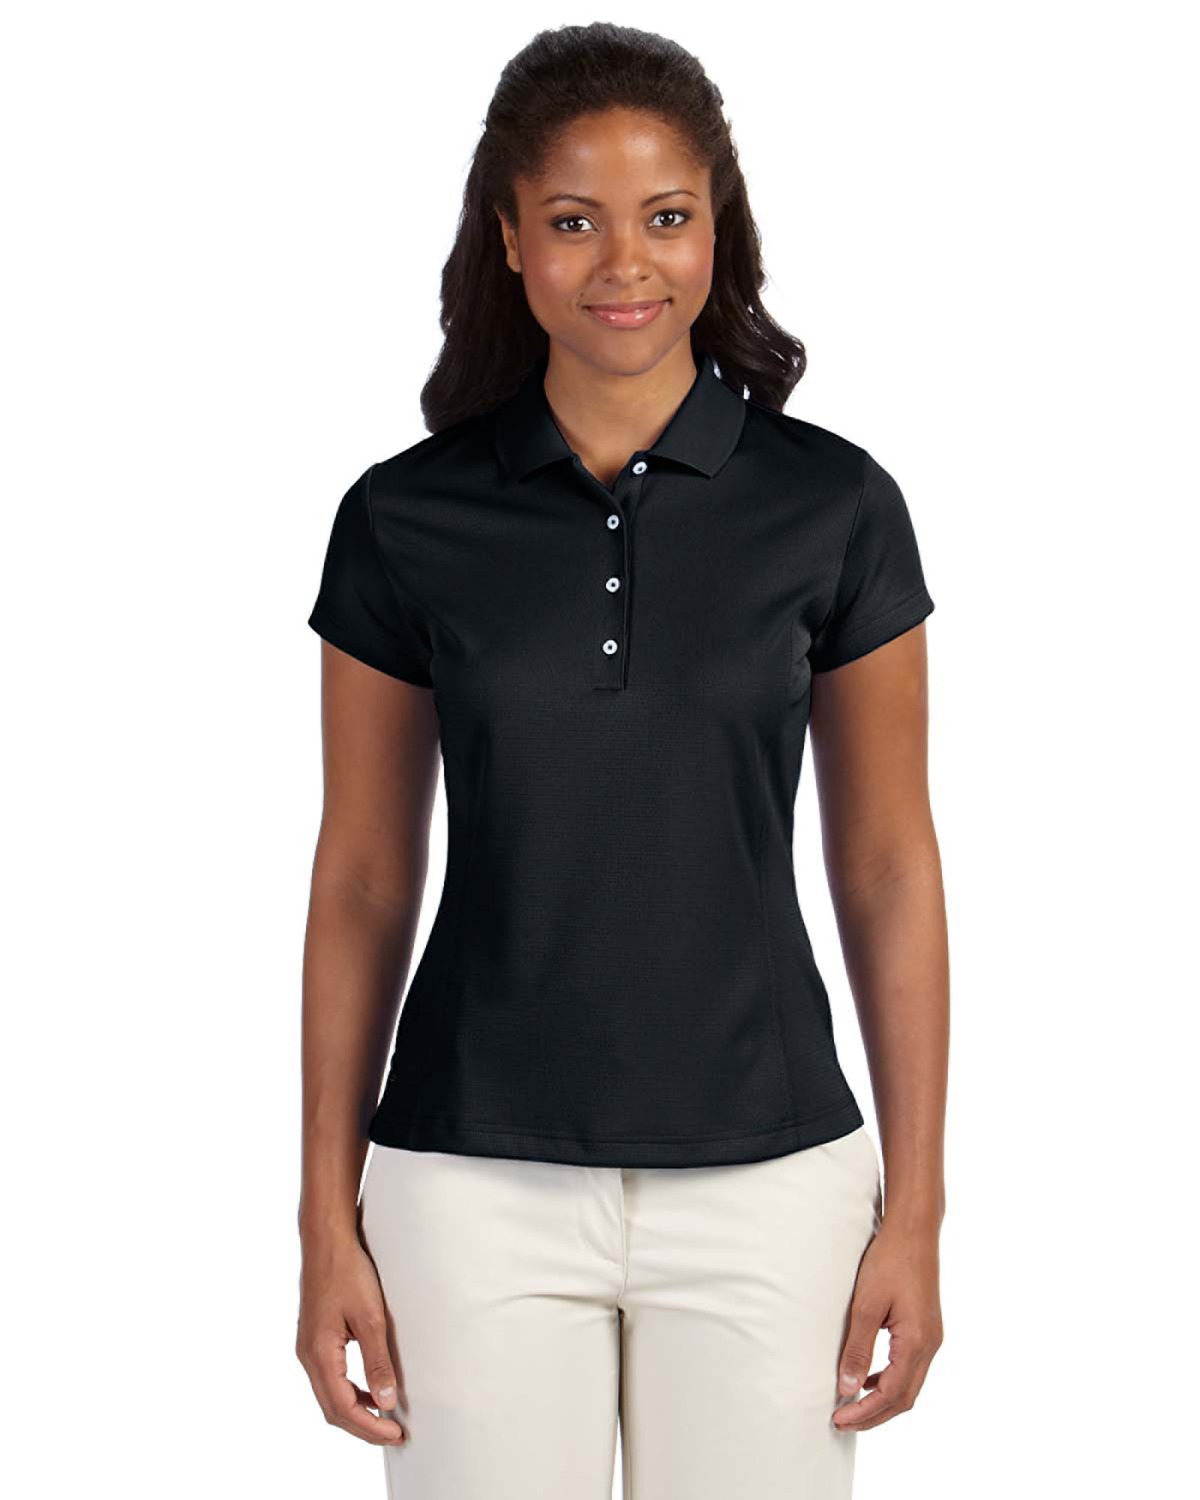 A171 adidas Golf Ladies' climalite® Solid Polo - From $33.88